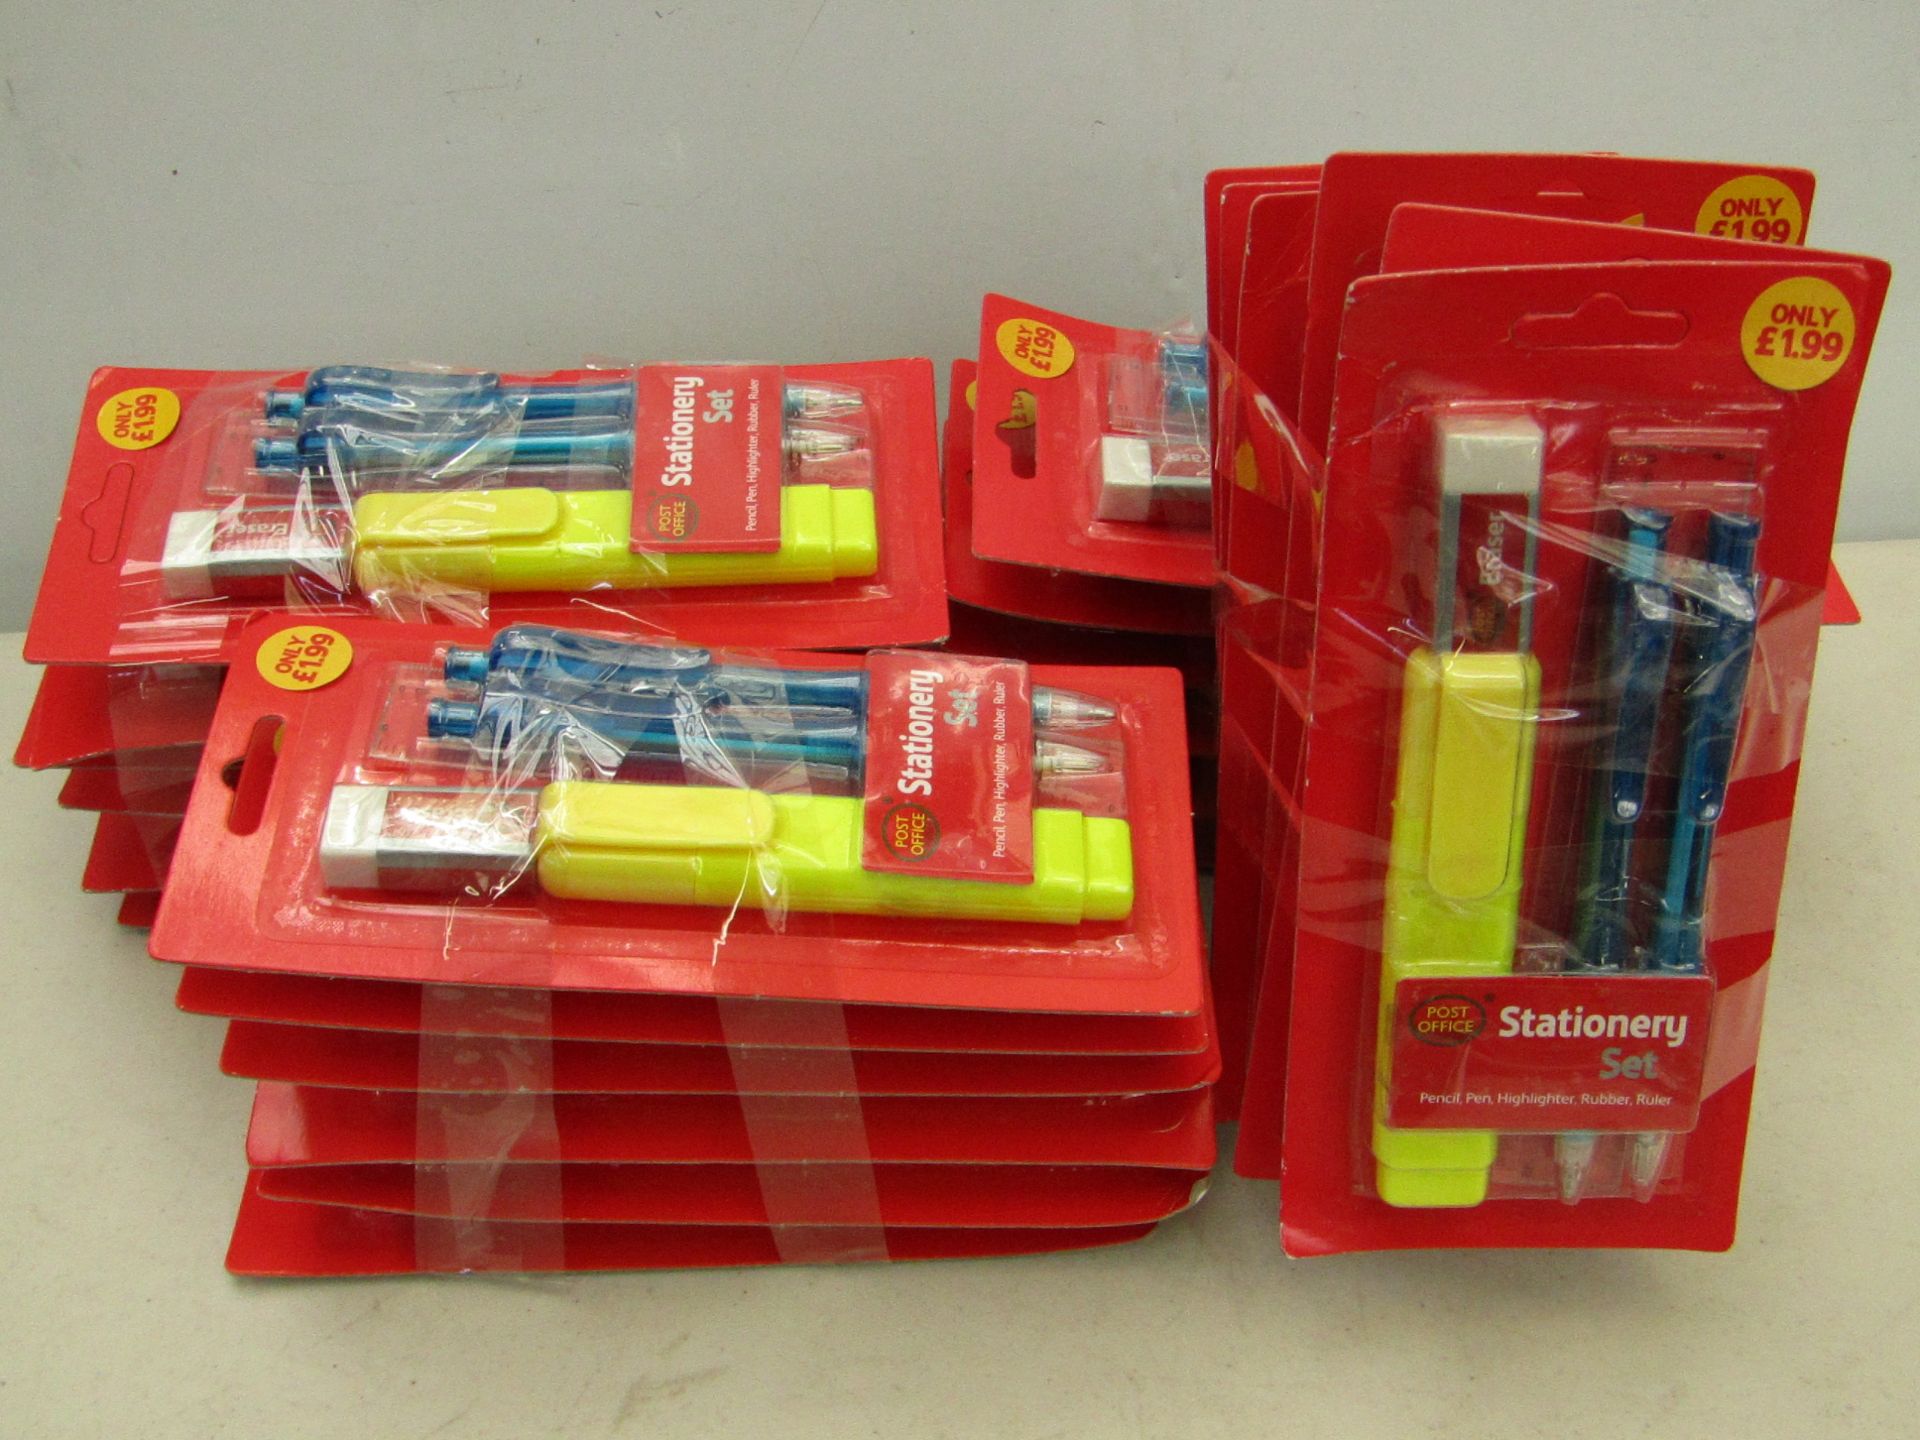 24x Post Office stationary sets, each set includes: pencil, pen, highlighter, rubber, ruler.